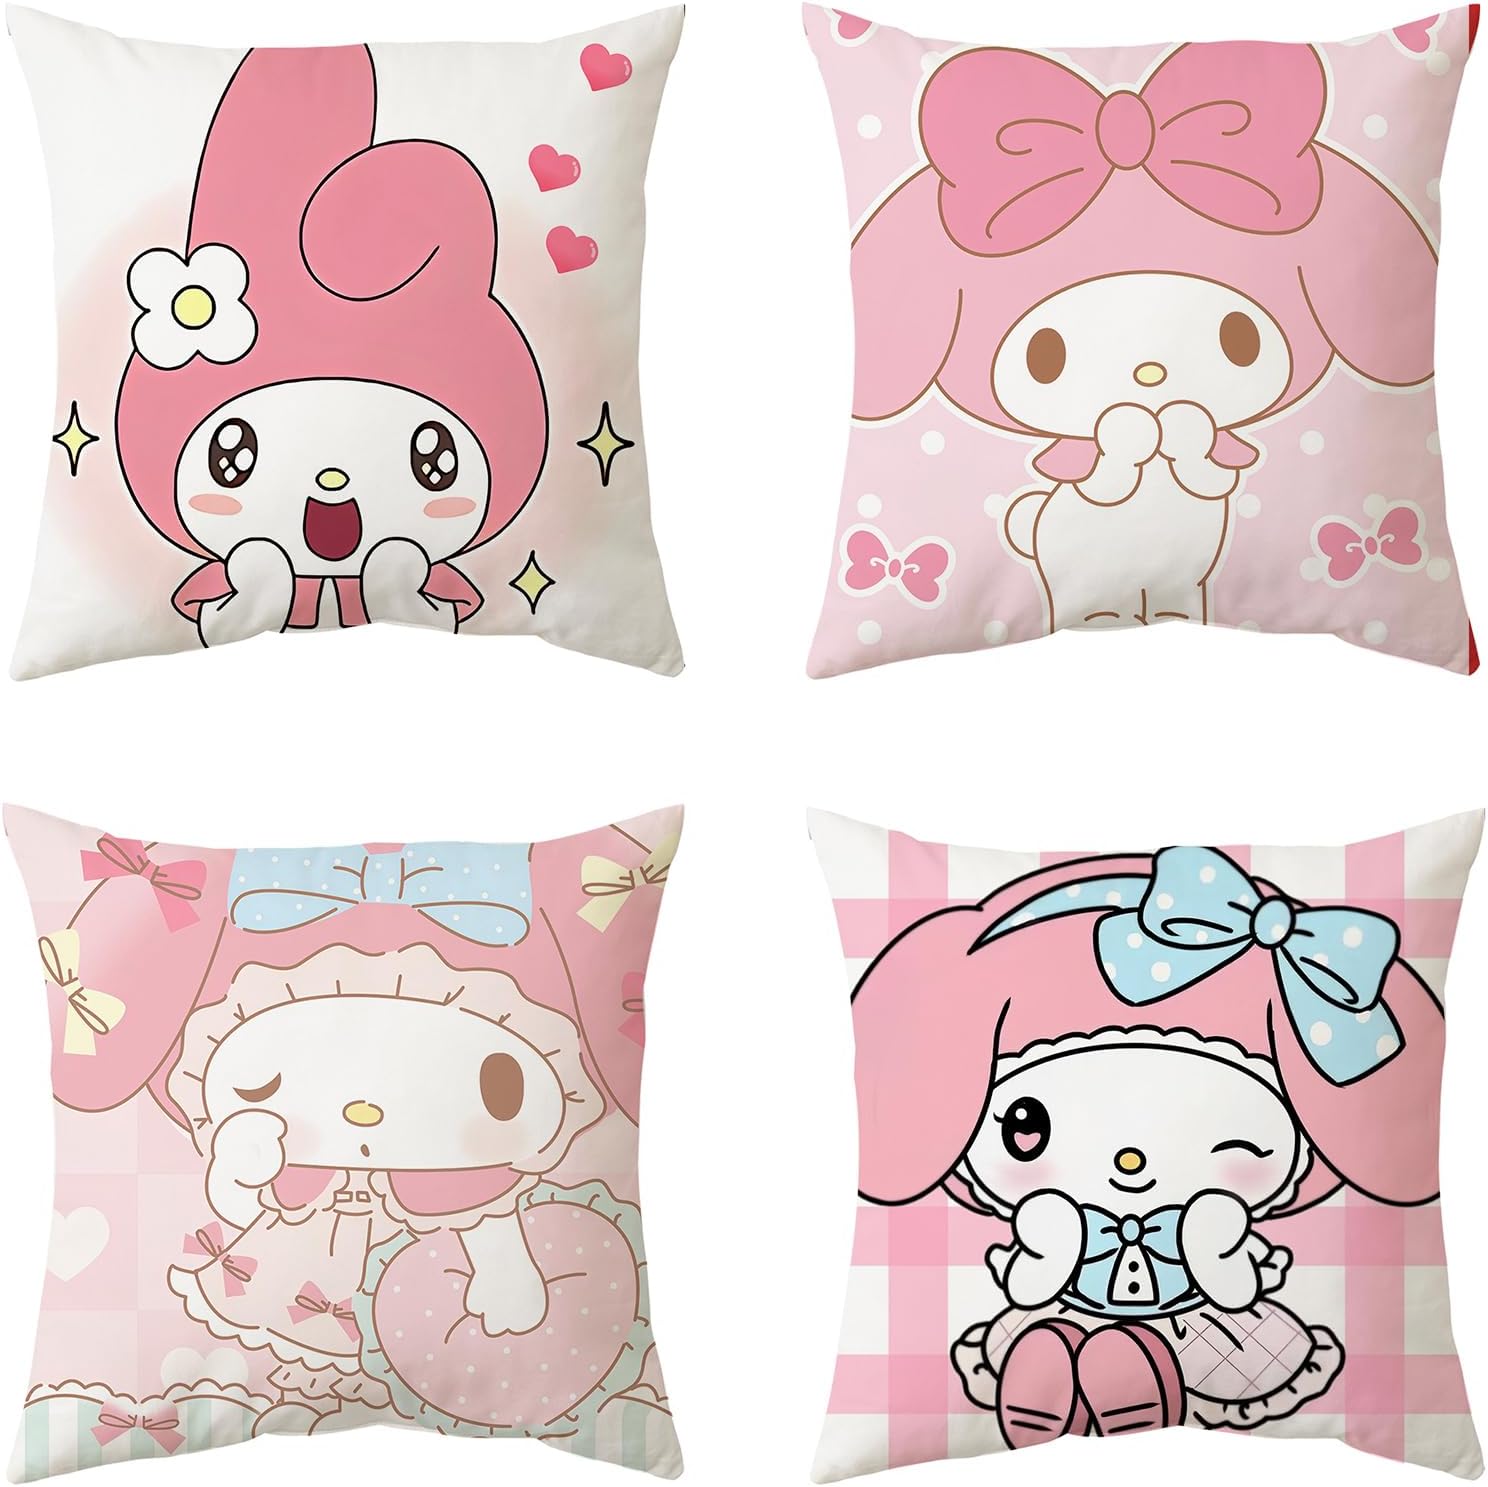 Kawaii Throw Pillow Covers Set of 4, Cute Cartoon Anime Decorative Pillows Covers for Bed and Couch/Sofa, 18x18 Inch Pillow Cases for Bedroom and Living Room (B)